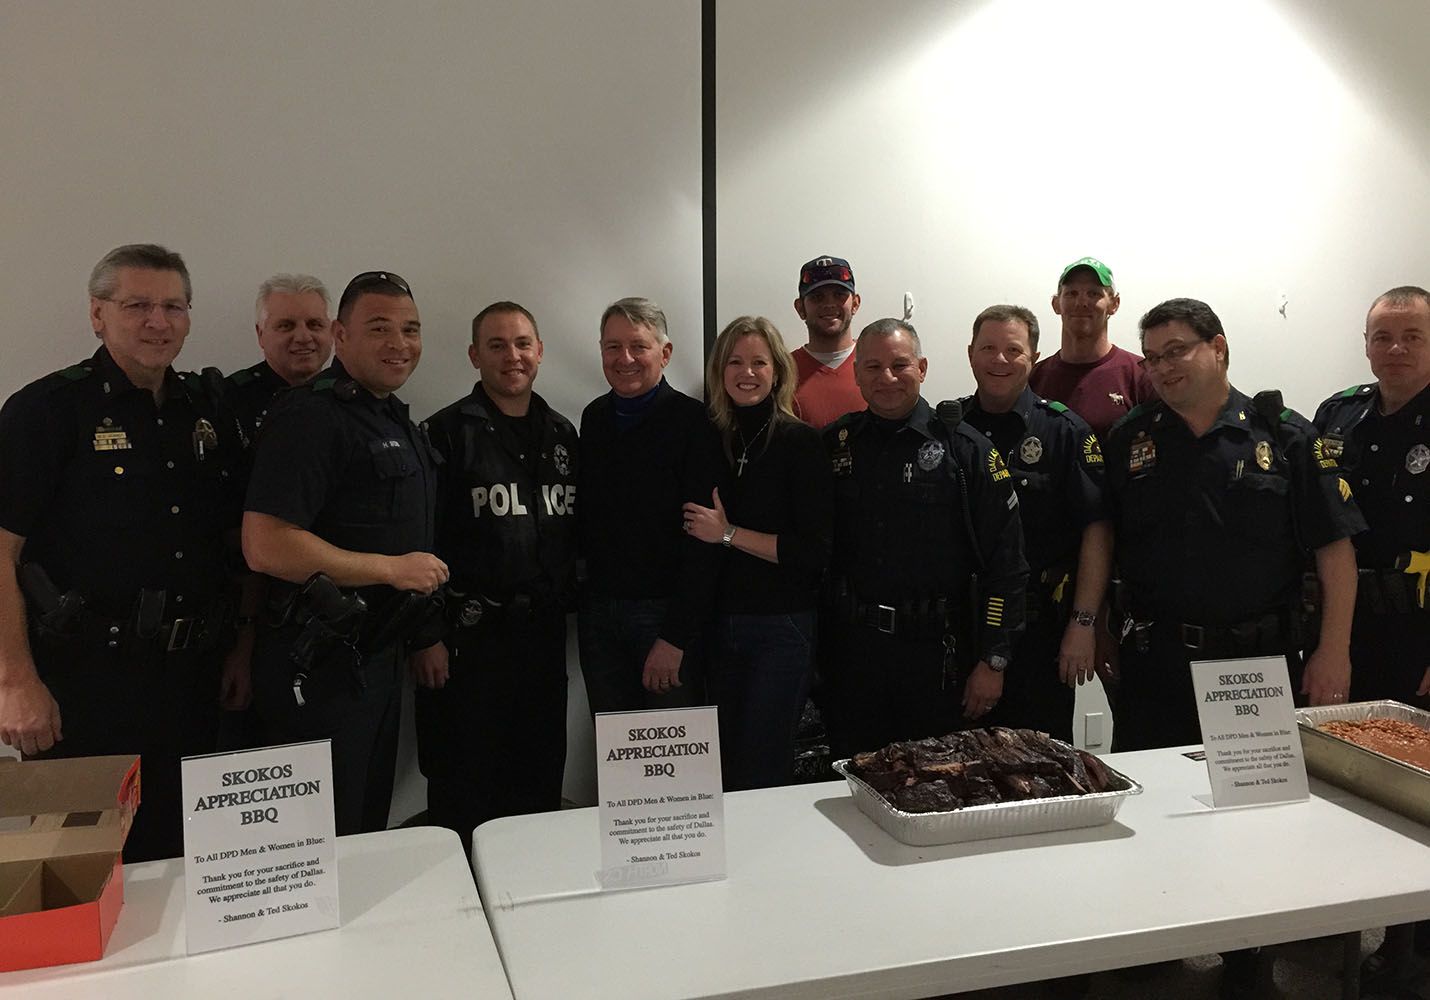 Ted and Shannon Skokos Foundation Hosting appreciation event for police officers